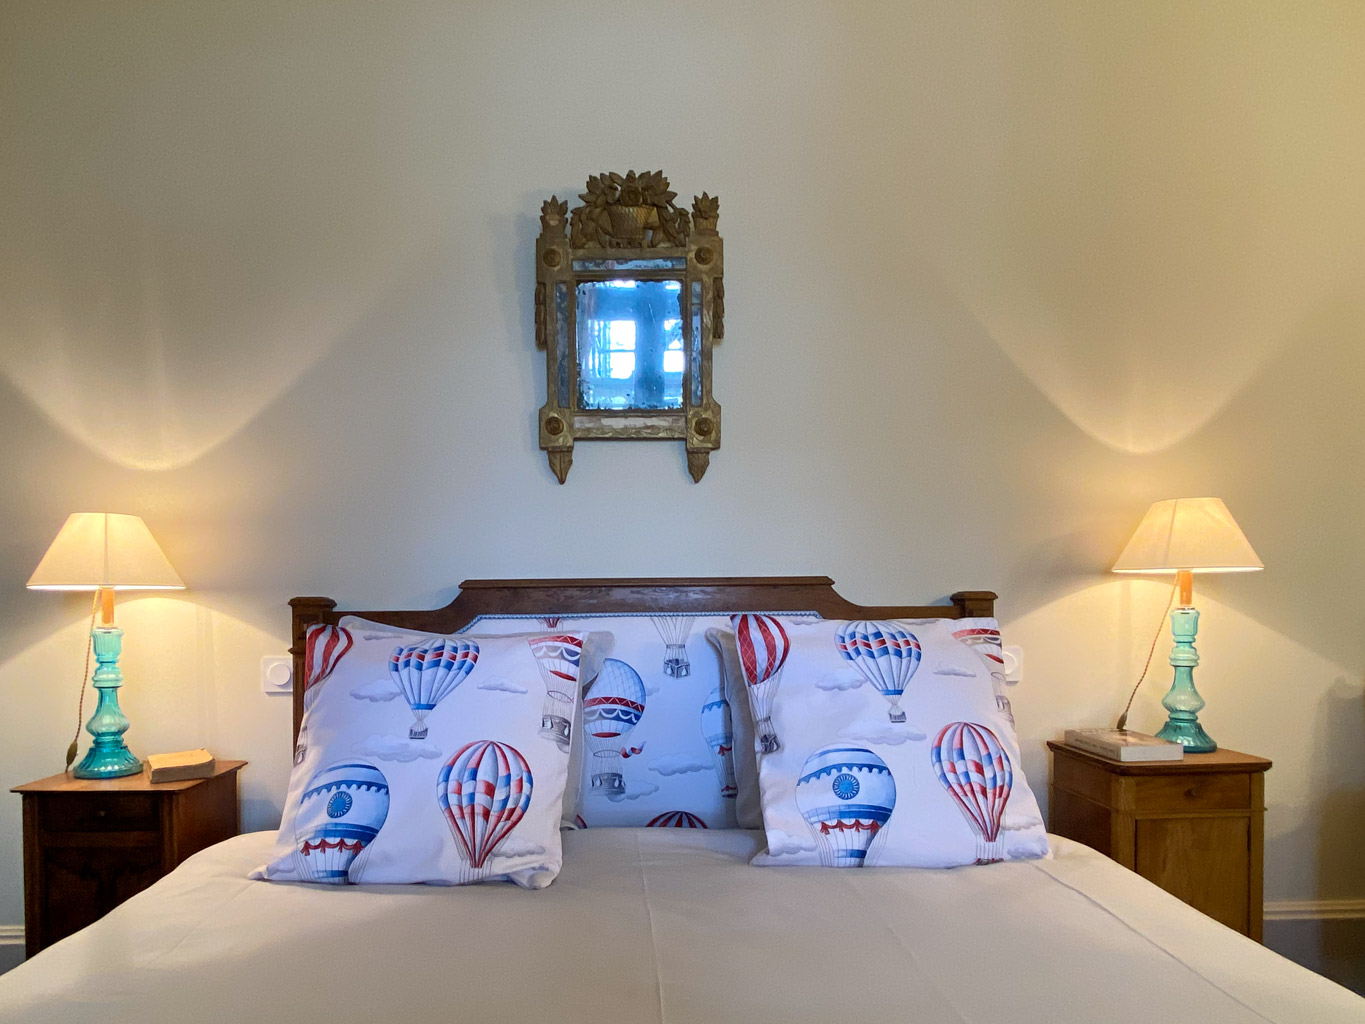 Château d&#039;Ainay-le-Vieil, the guest rooms, the Bigny Suite, view of the double bed with decorative cushions with hot-air balloon motifs and illuminated bedside tables